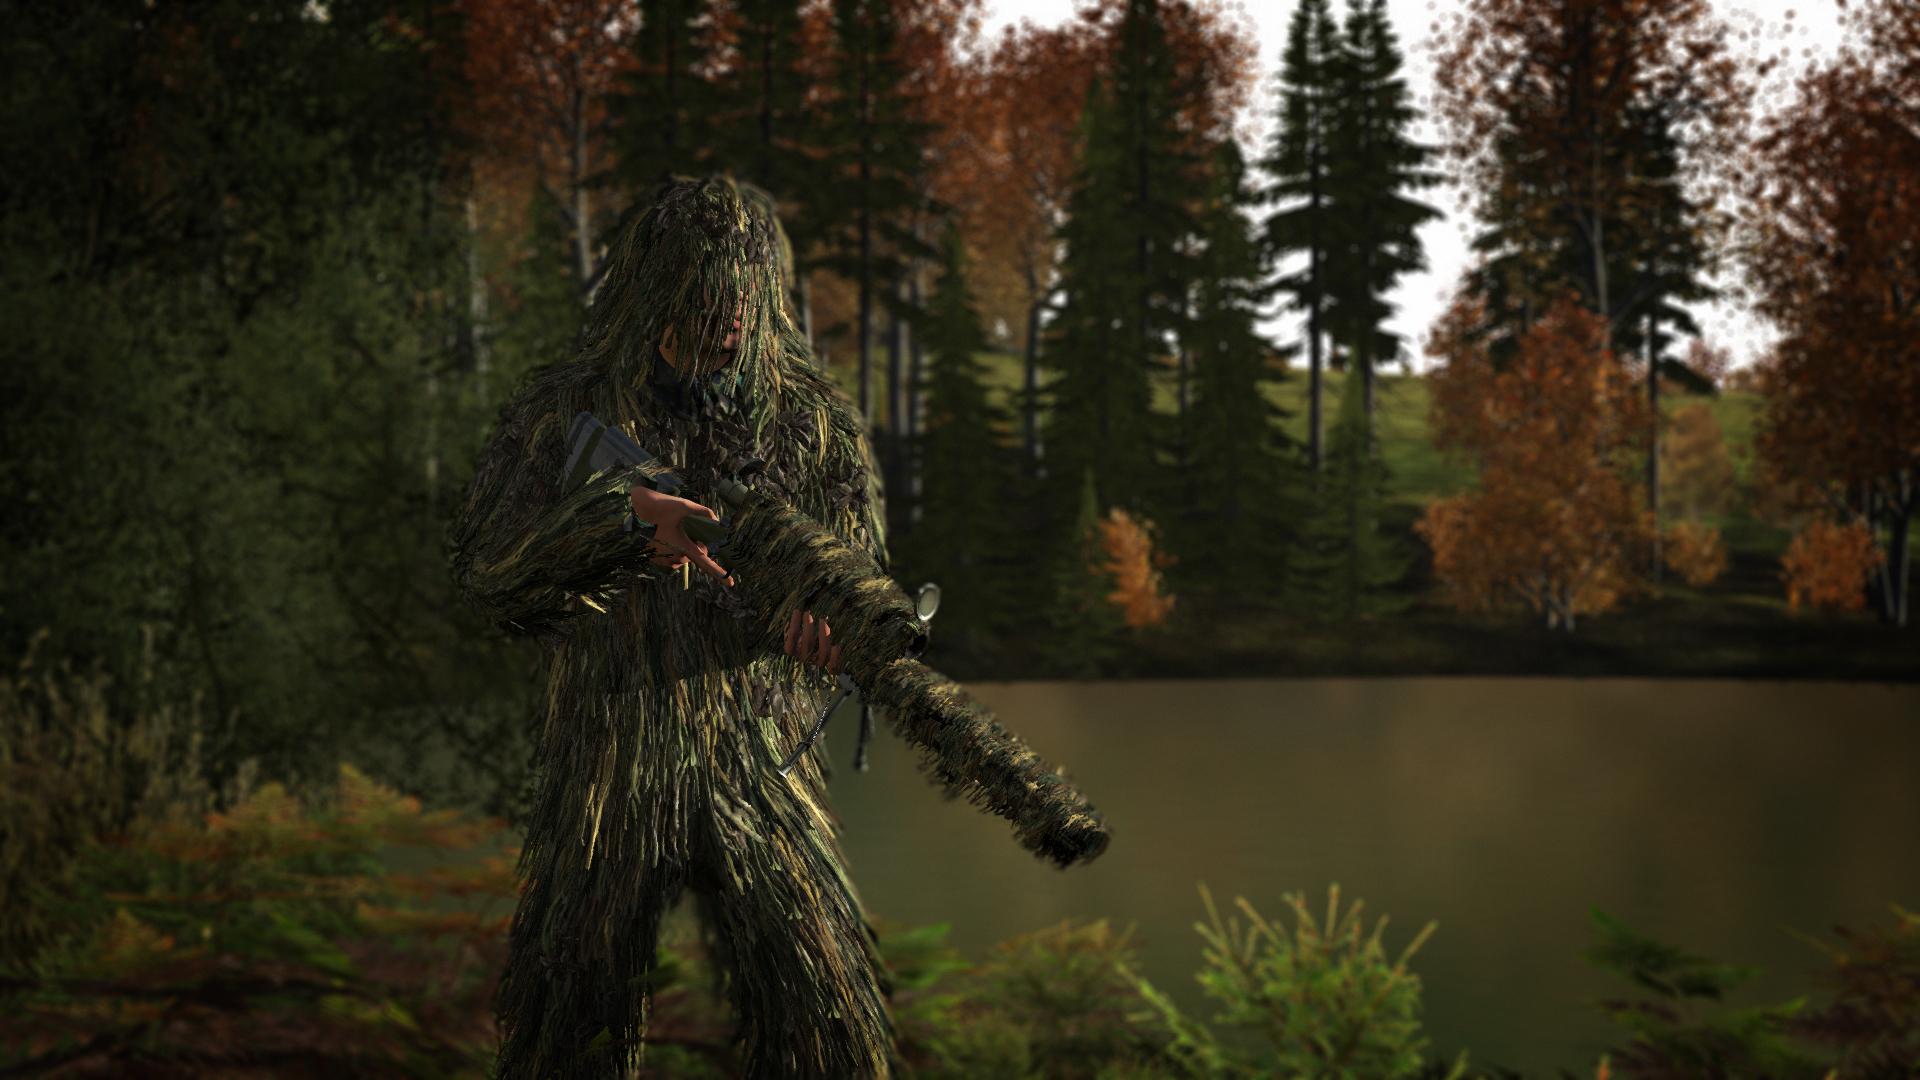 ArmA 2 Sniper Wallpaper by Clarenmj on